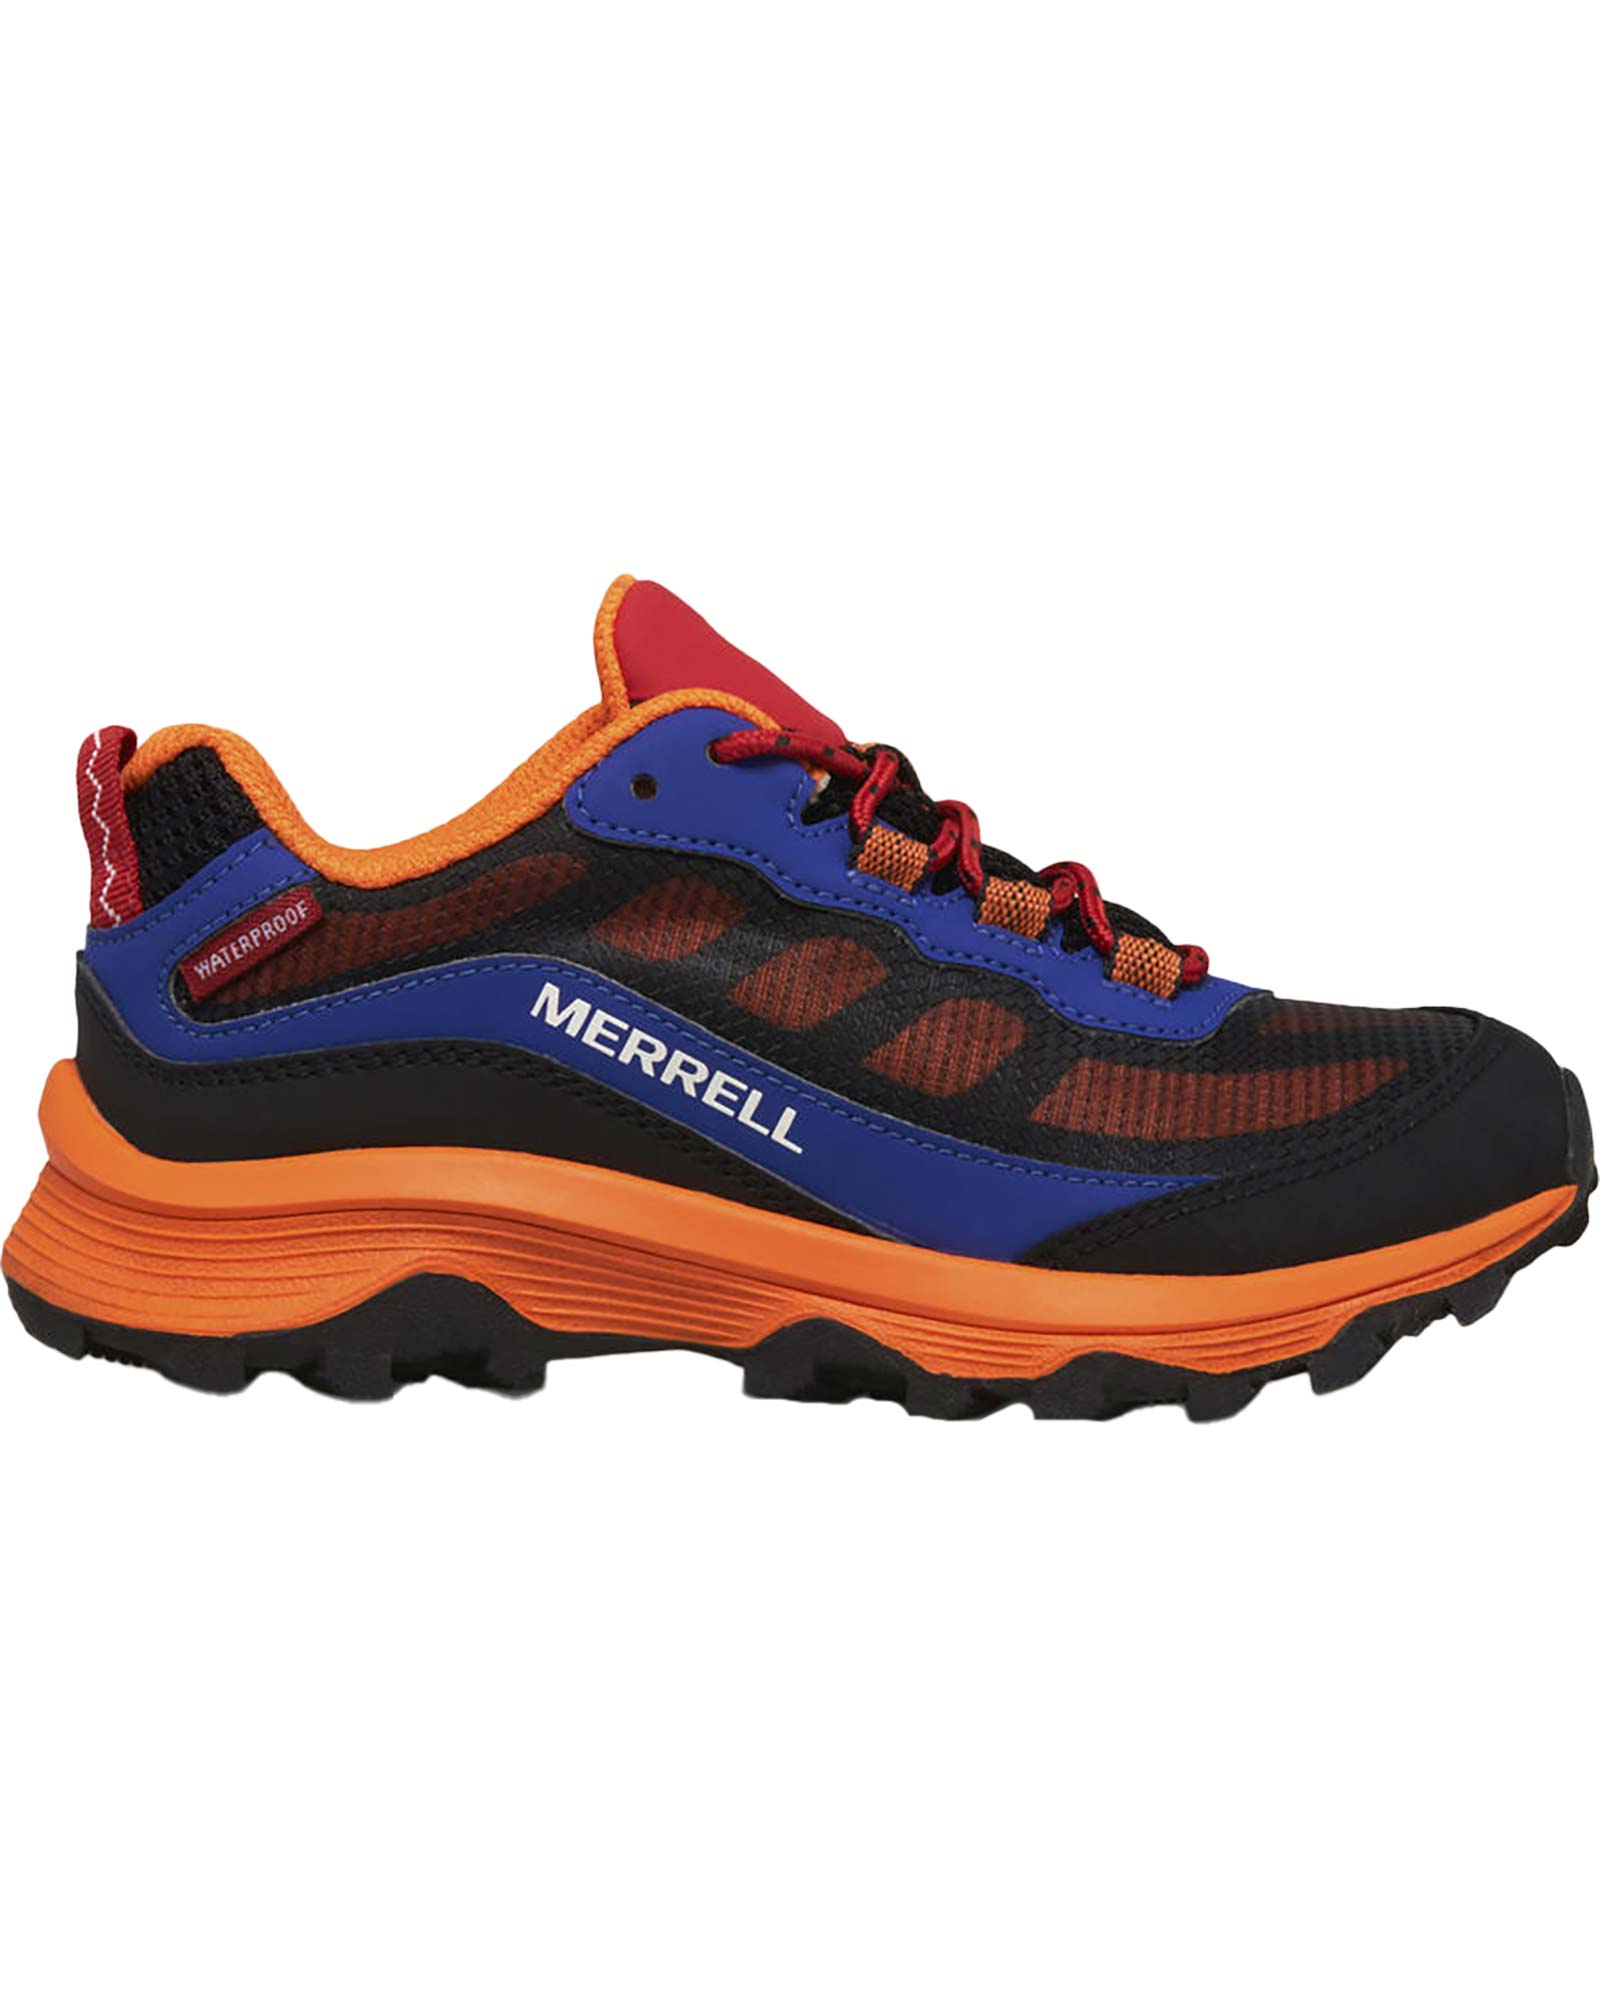 Merrell Moab Speed Laces Kids' Waterproof Shoes